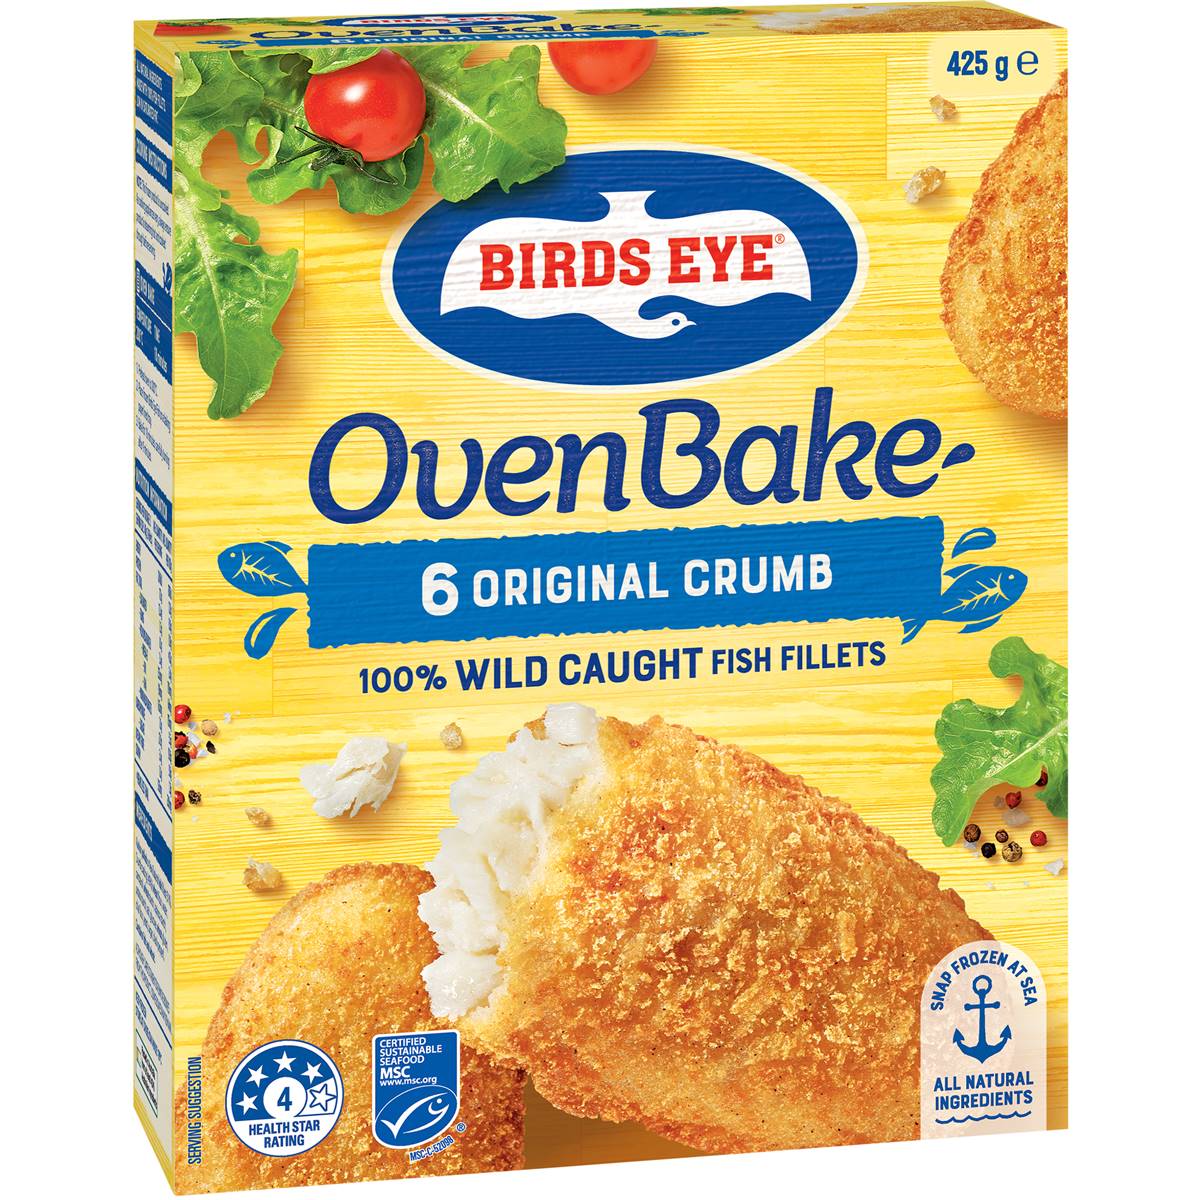 Calories in Birds Eye Oven Bake Crumbed Wild Caught Fish Fillets